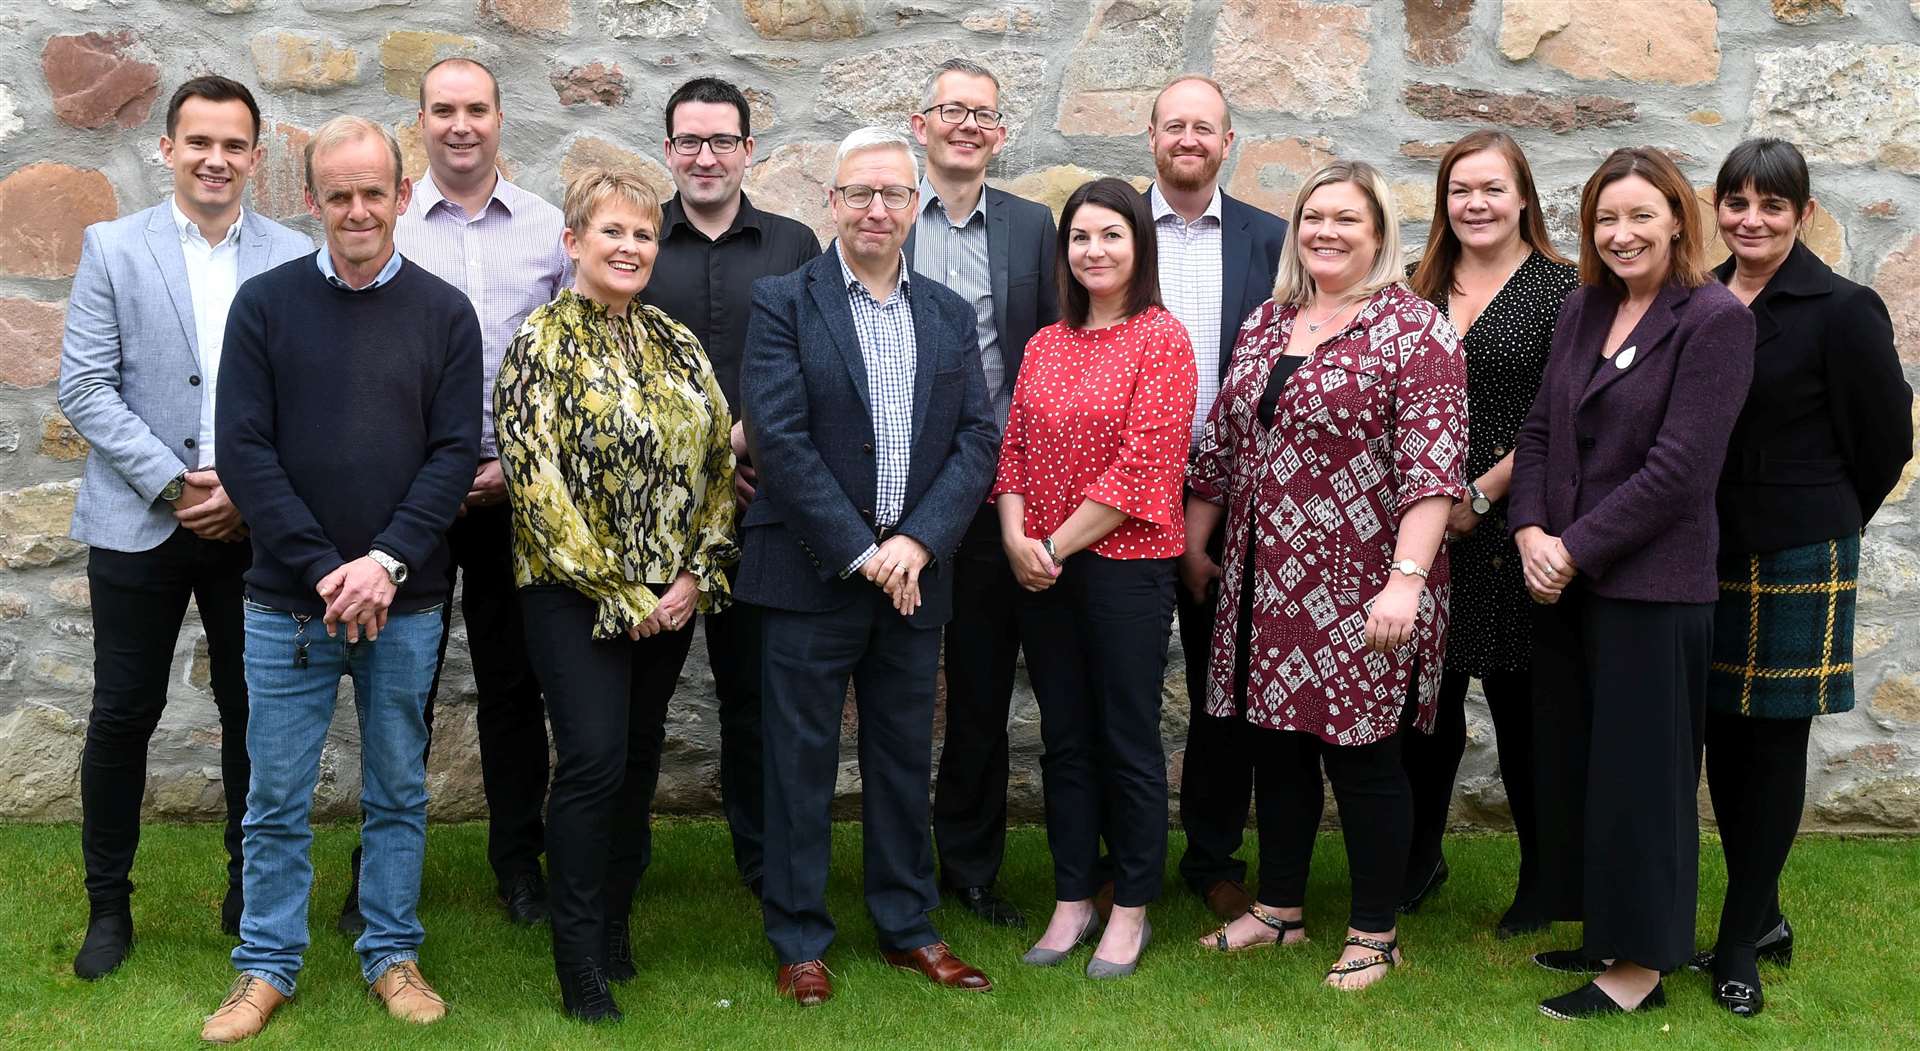 Highlands and Islands Food and Drink Awards judges had plenty to chew over among this year’s entrants.